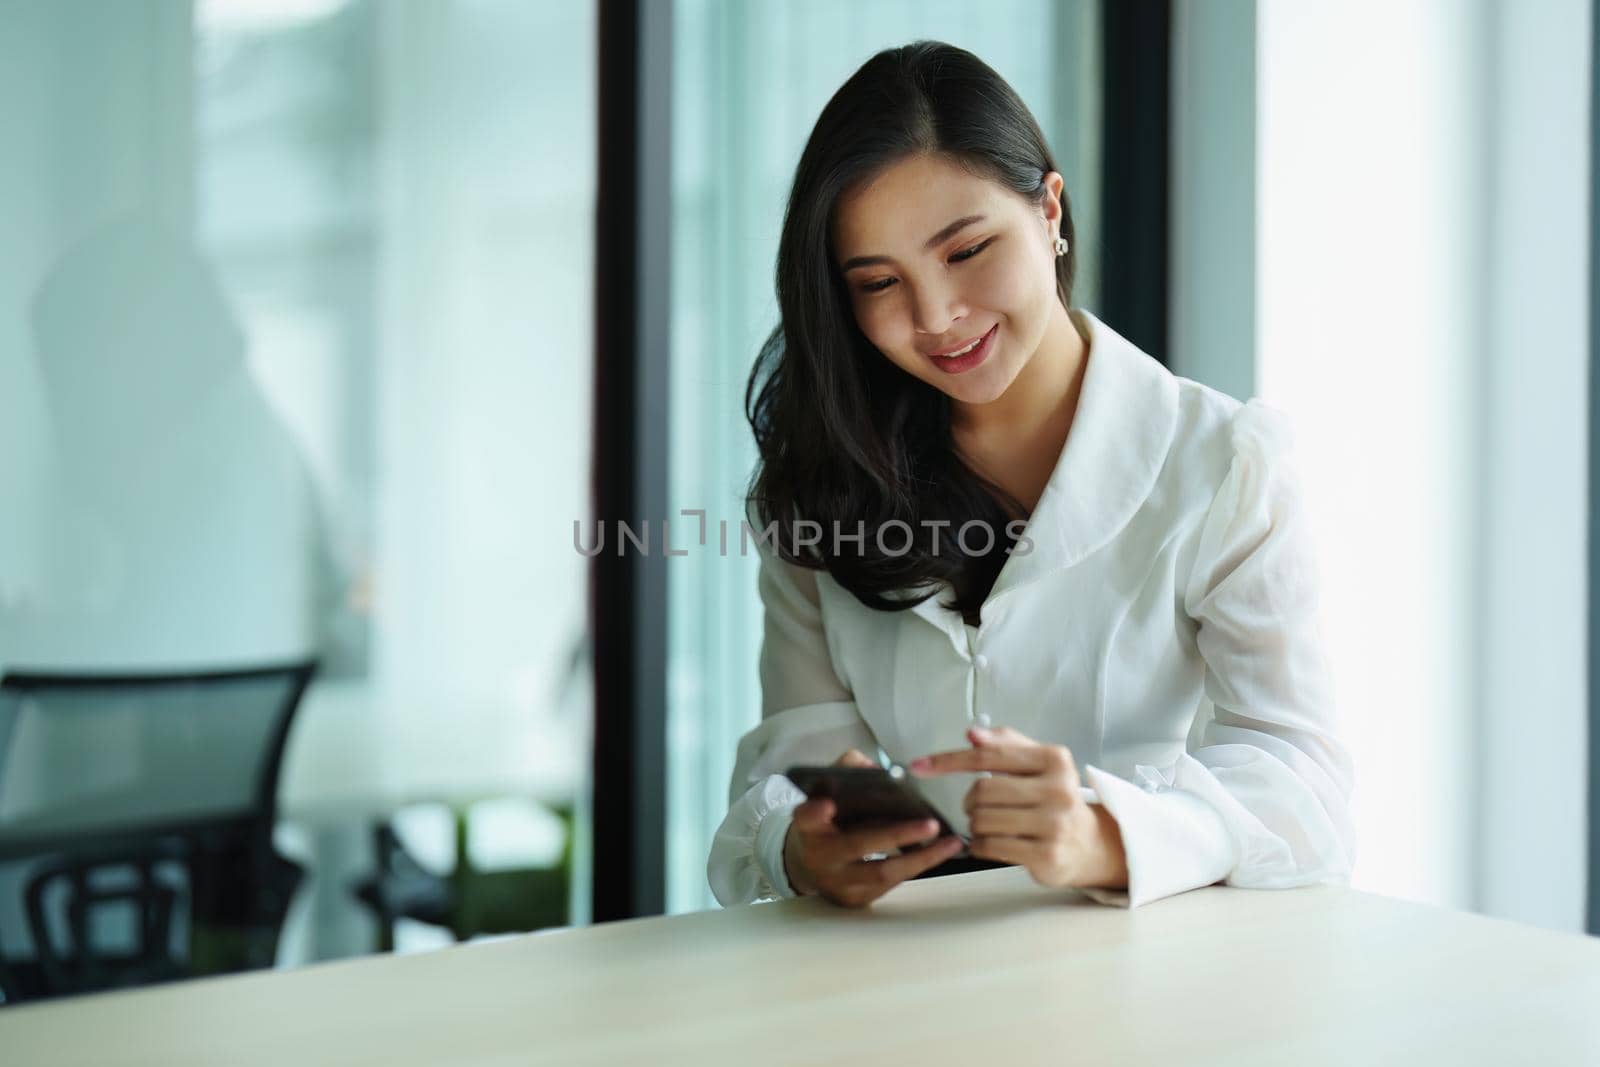 Portrait of a young Asian woman sitting at a desk using her phone by Manastrong